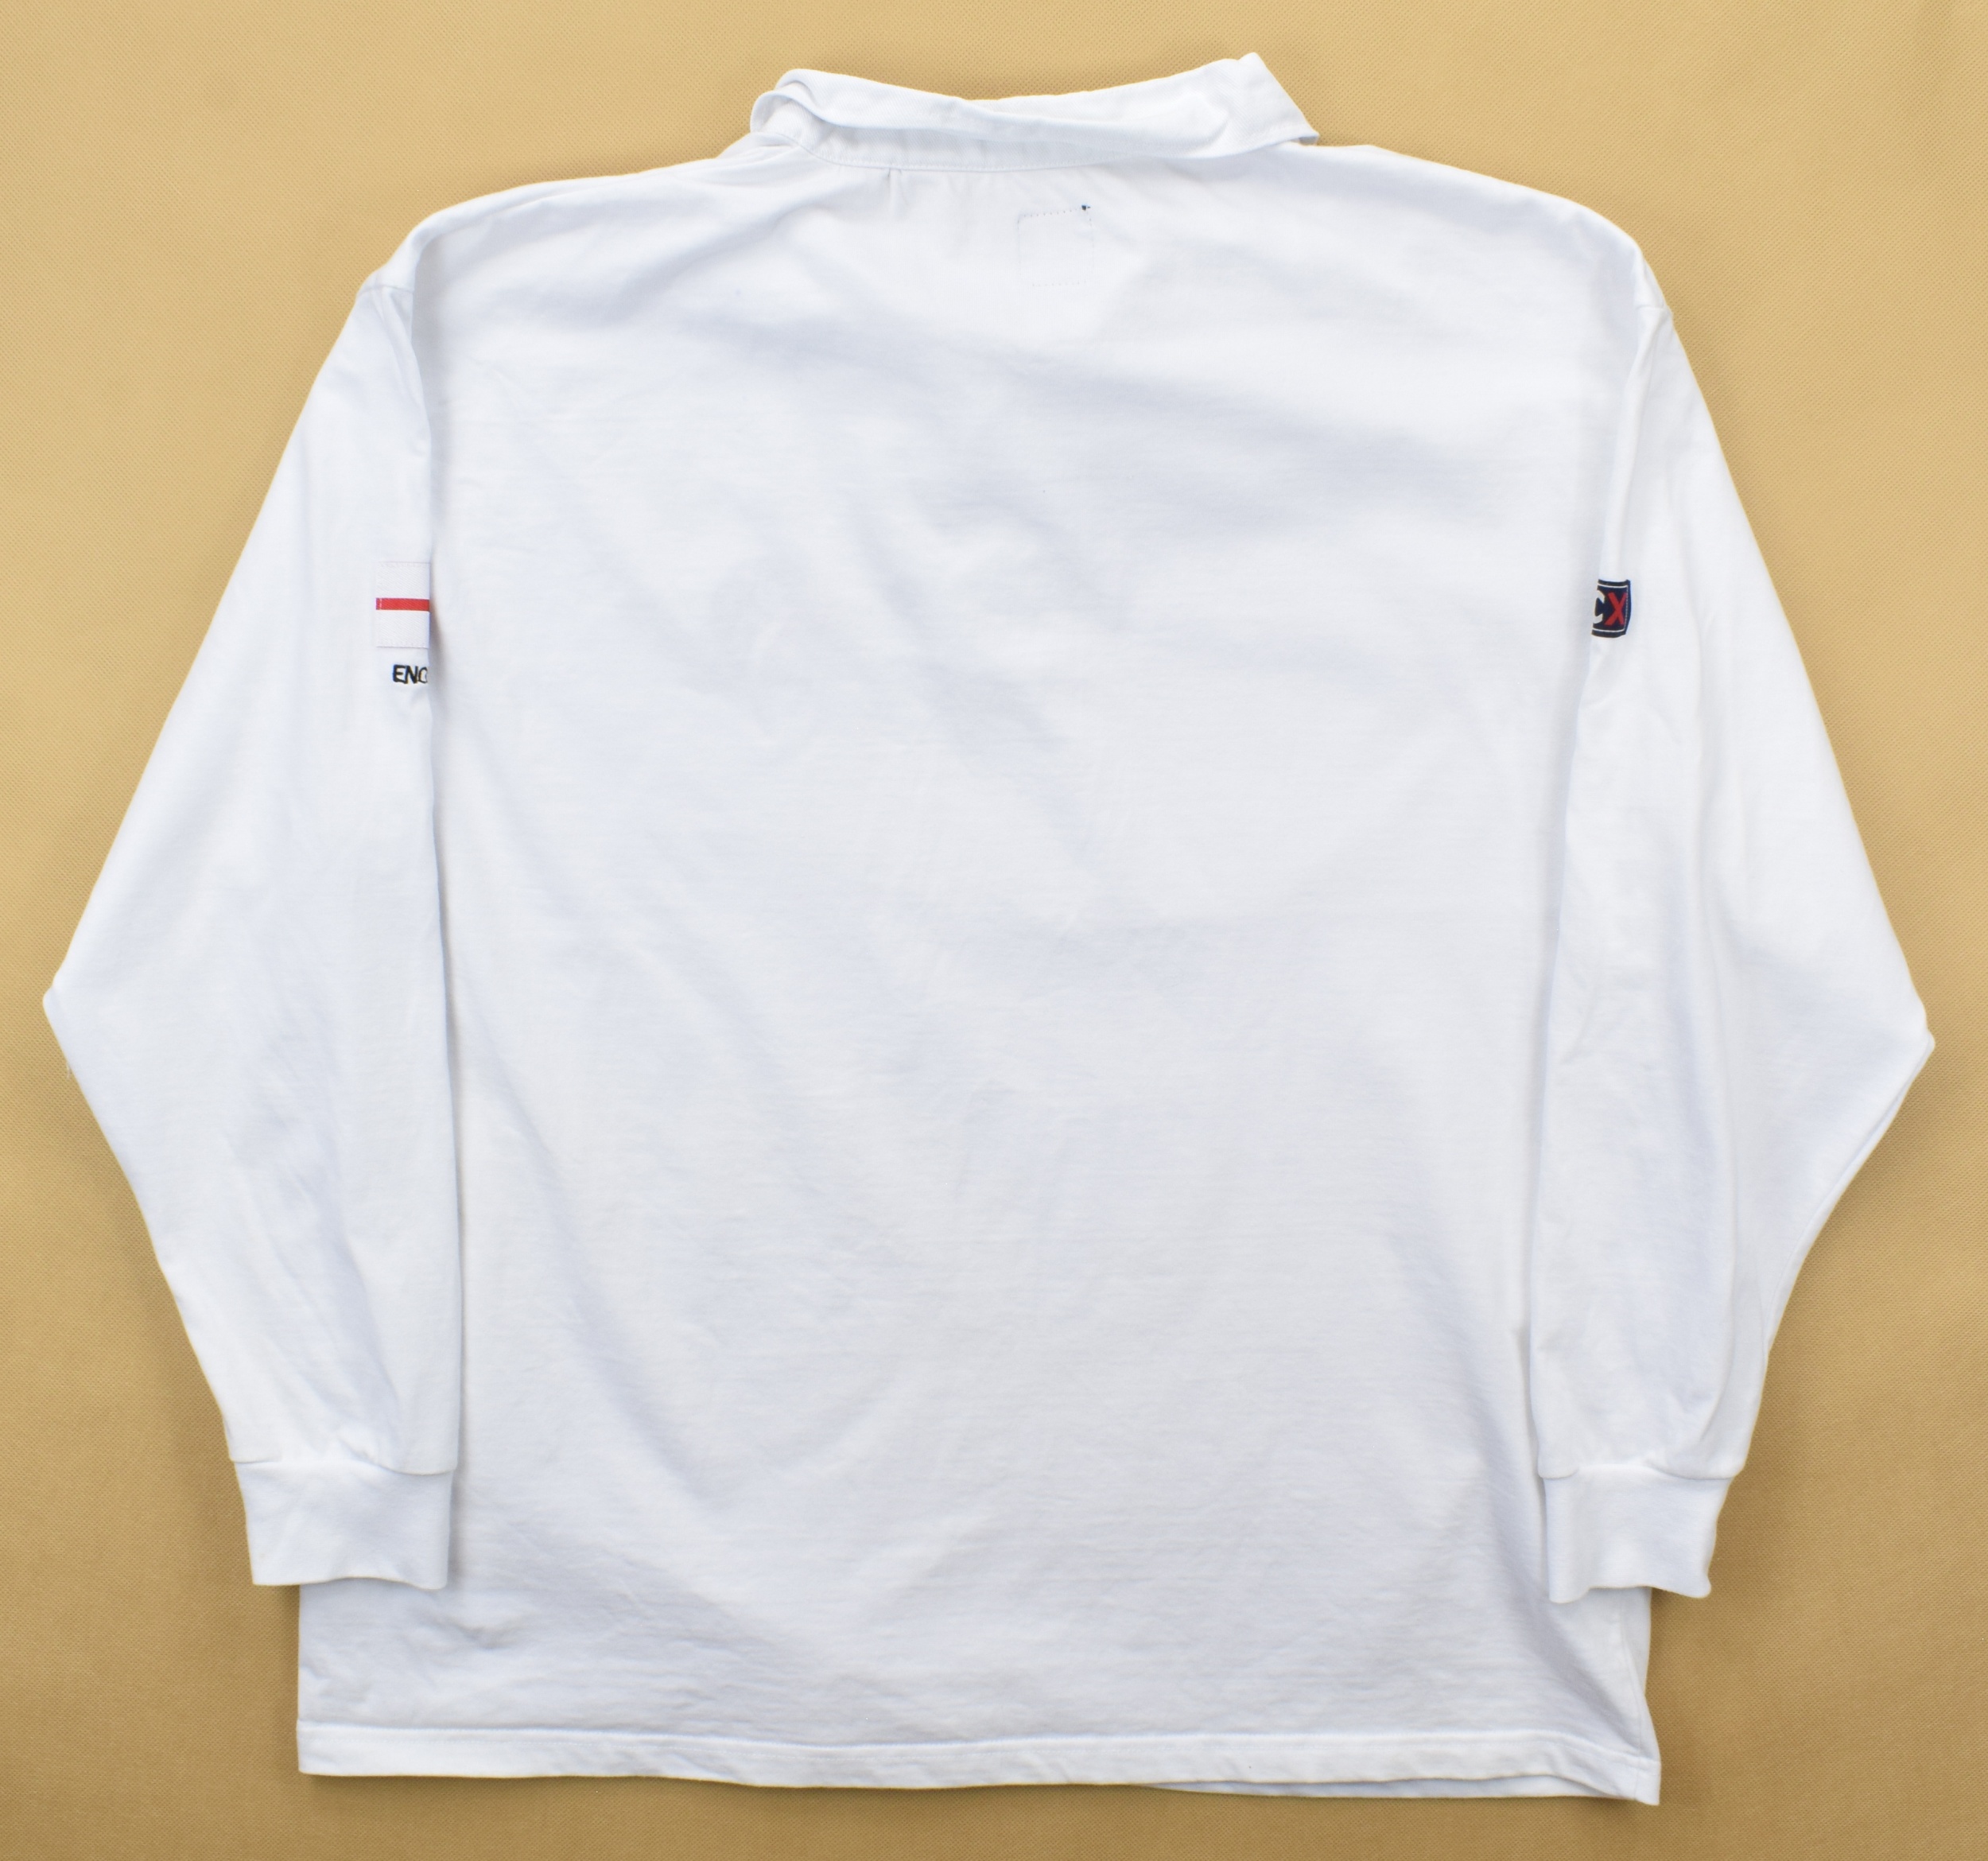 ENGLAND RUGBY UMBRO LONGSLEEVE 2XL Rugby \ Rugby Union \ England ...